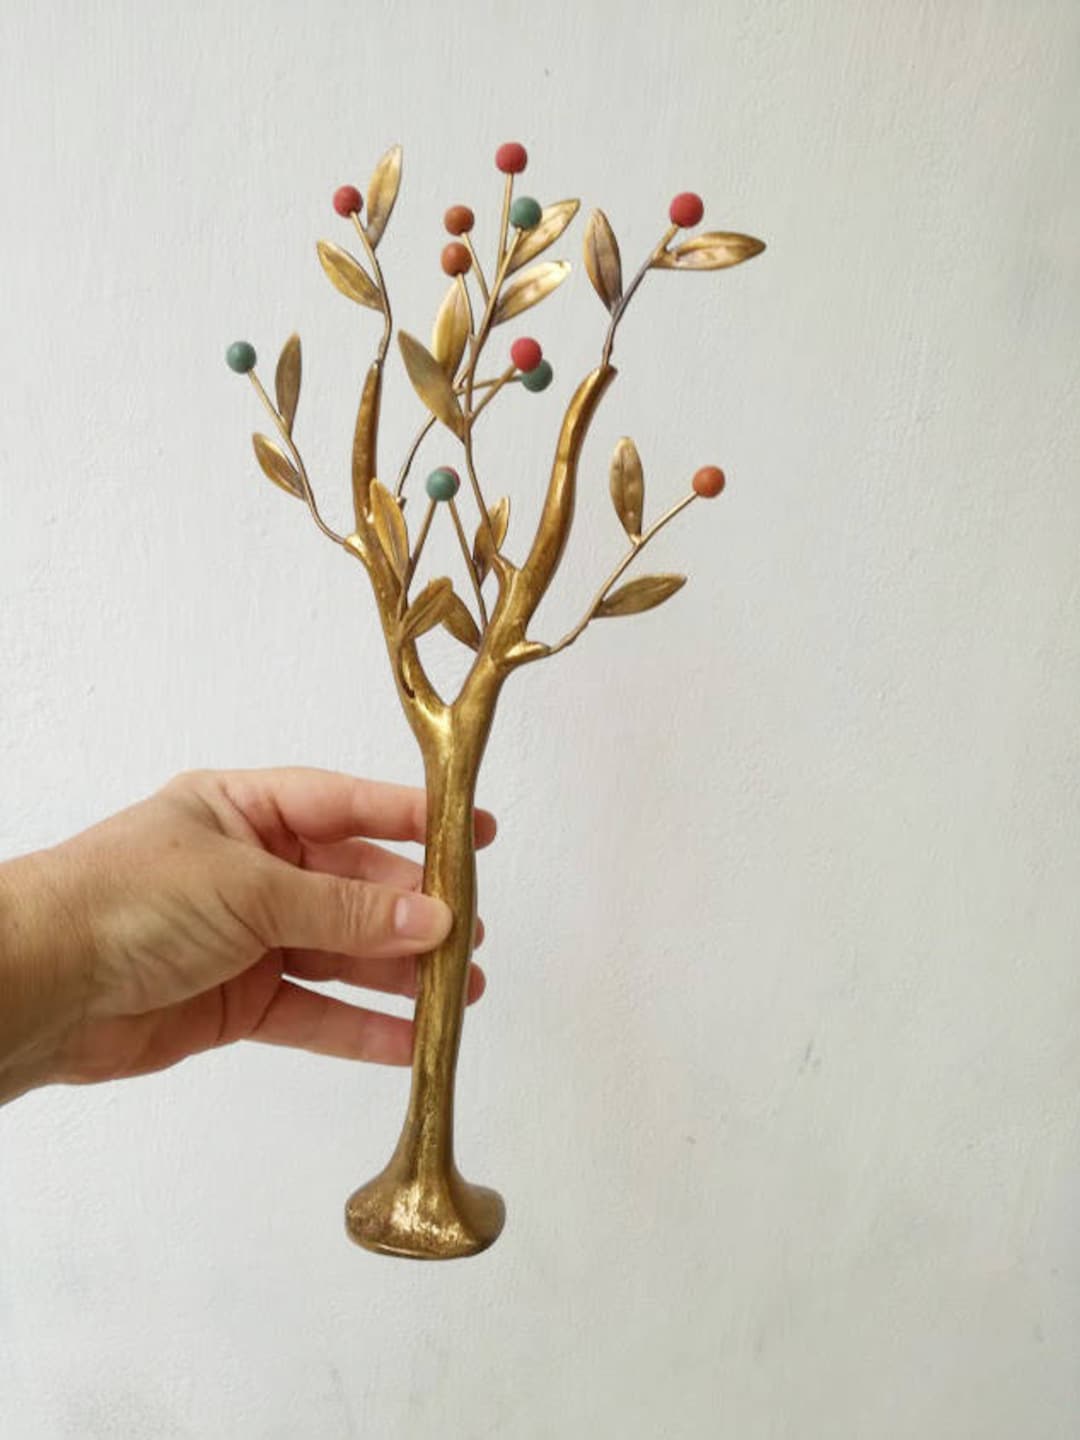 Brass Olive Tree, Oxidised Brass Greek Olive Tree Sculpture With Ceramic,  Multi Colored Olives, Gold Olive Tree Art Object, Olive Tree Gift 